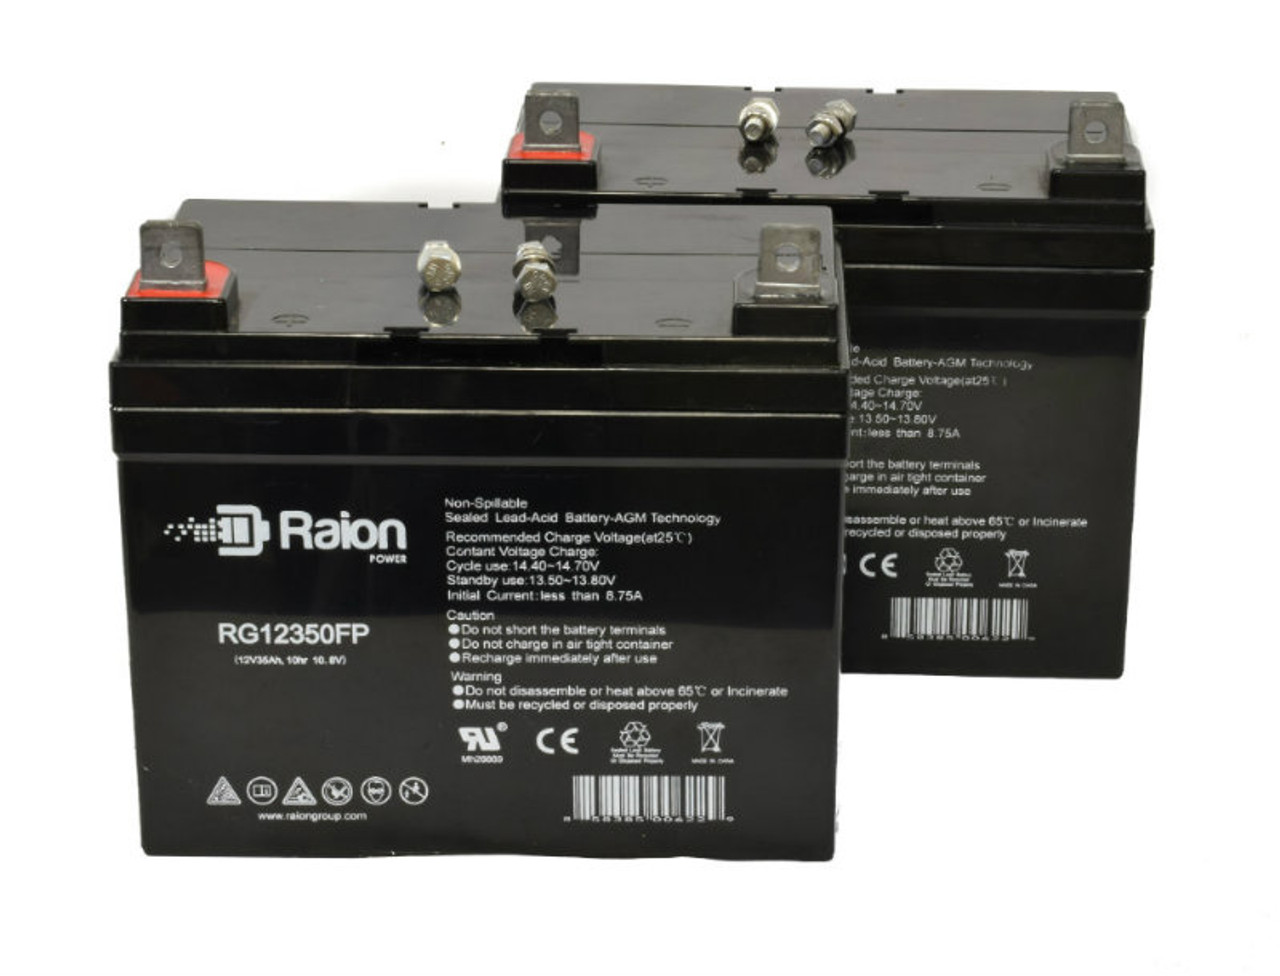 Raion Power Replacement 12V 35Ah Group U1 Battery for Golden Technologies Companion GC222 - 2 Pack